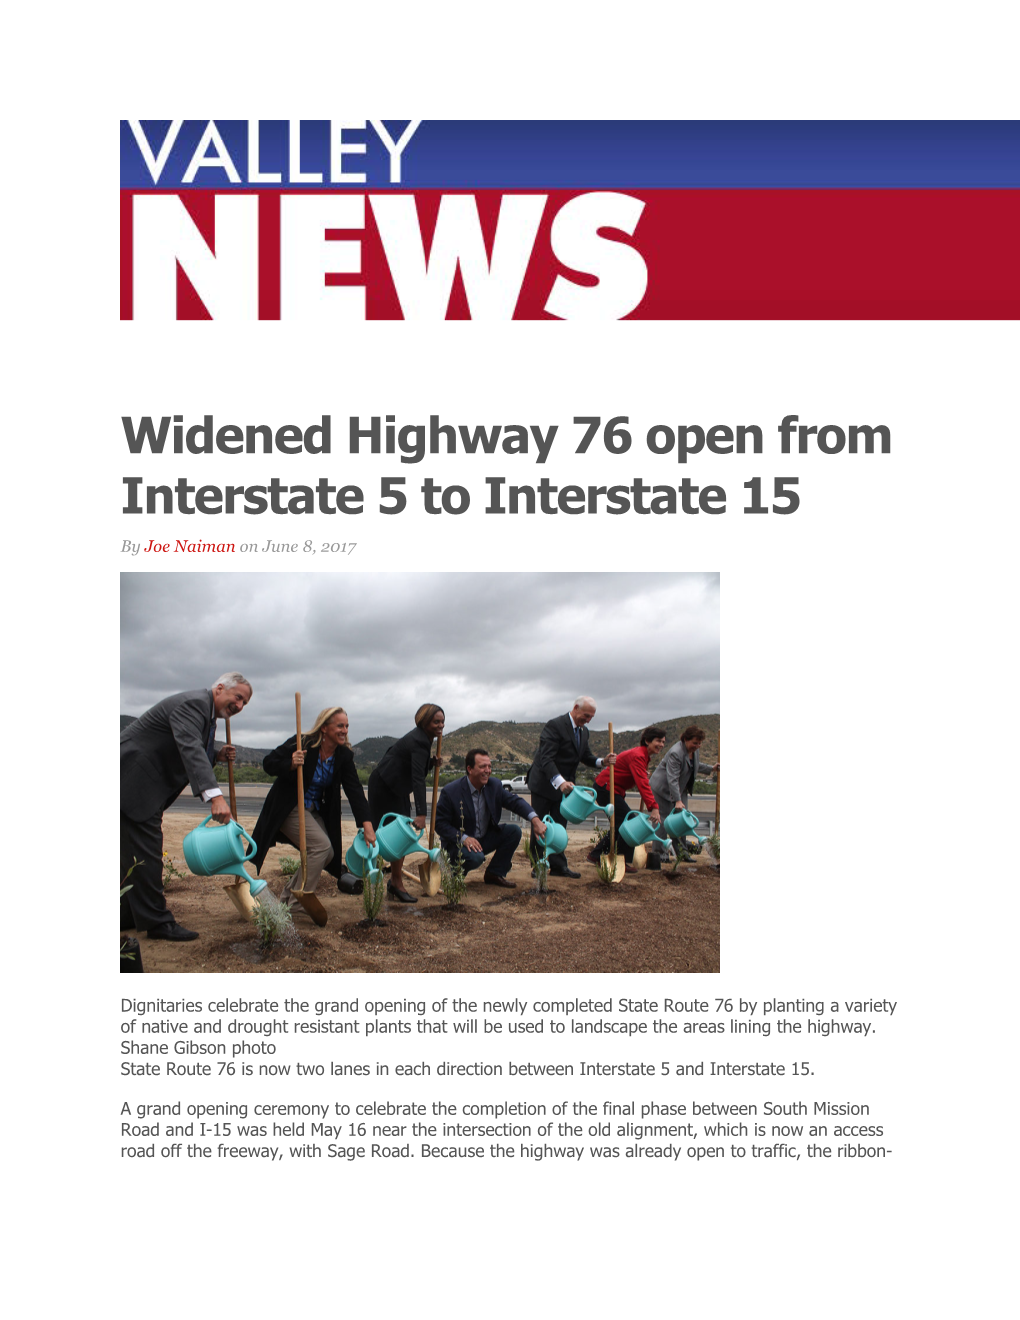 Widened Highway 76 Open from Interstate 5 to Interstate 15